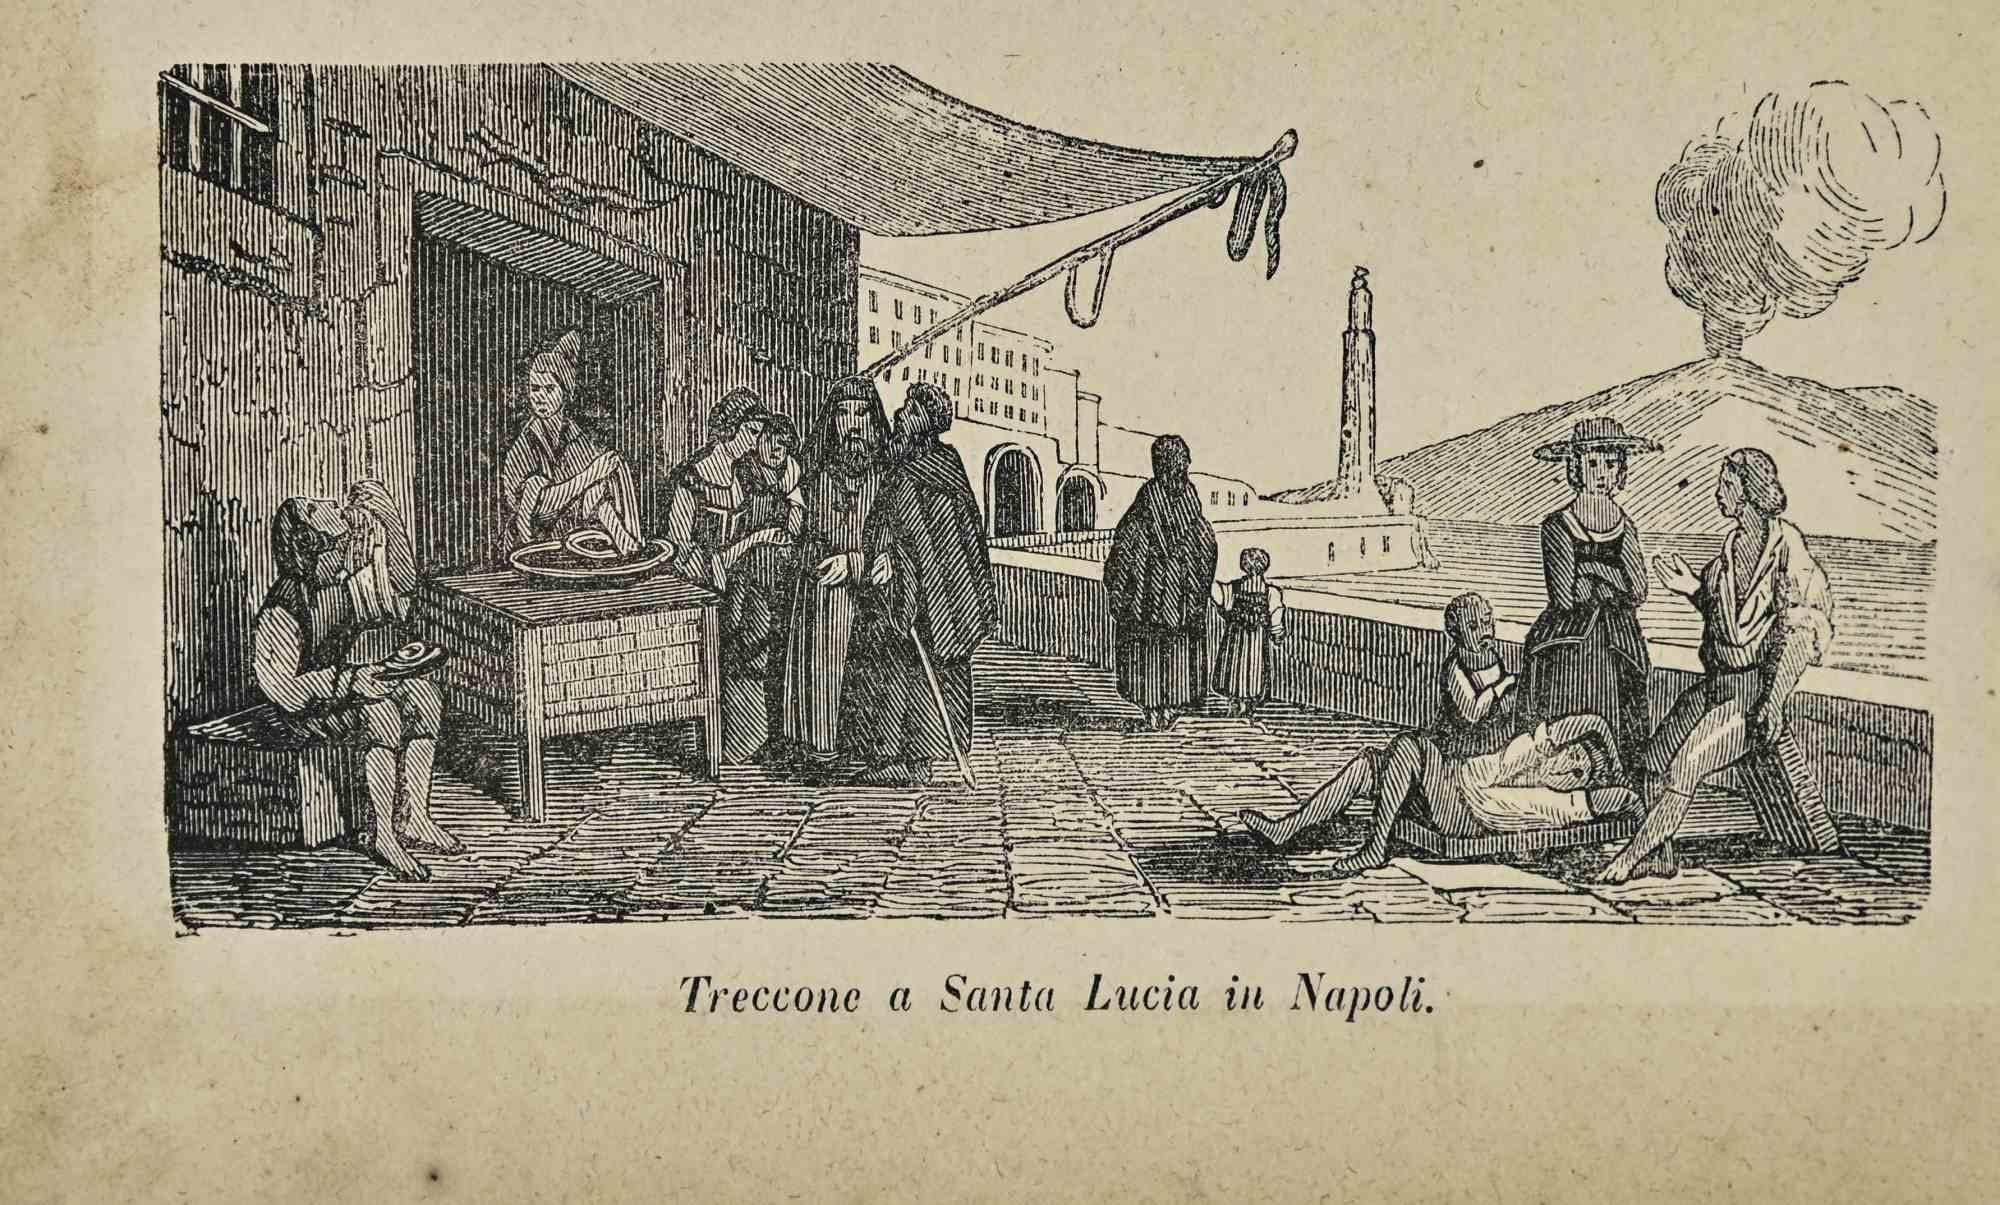 Various Artists Figurative Print - Uses and Customs - Braid in Saint Lucia in Naples - Lithograph - 1862